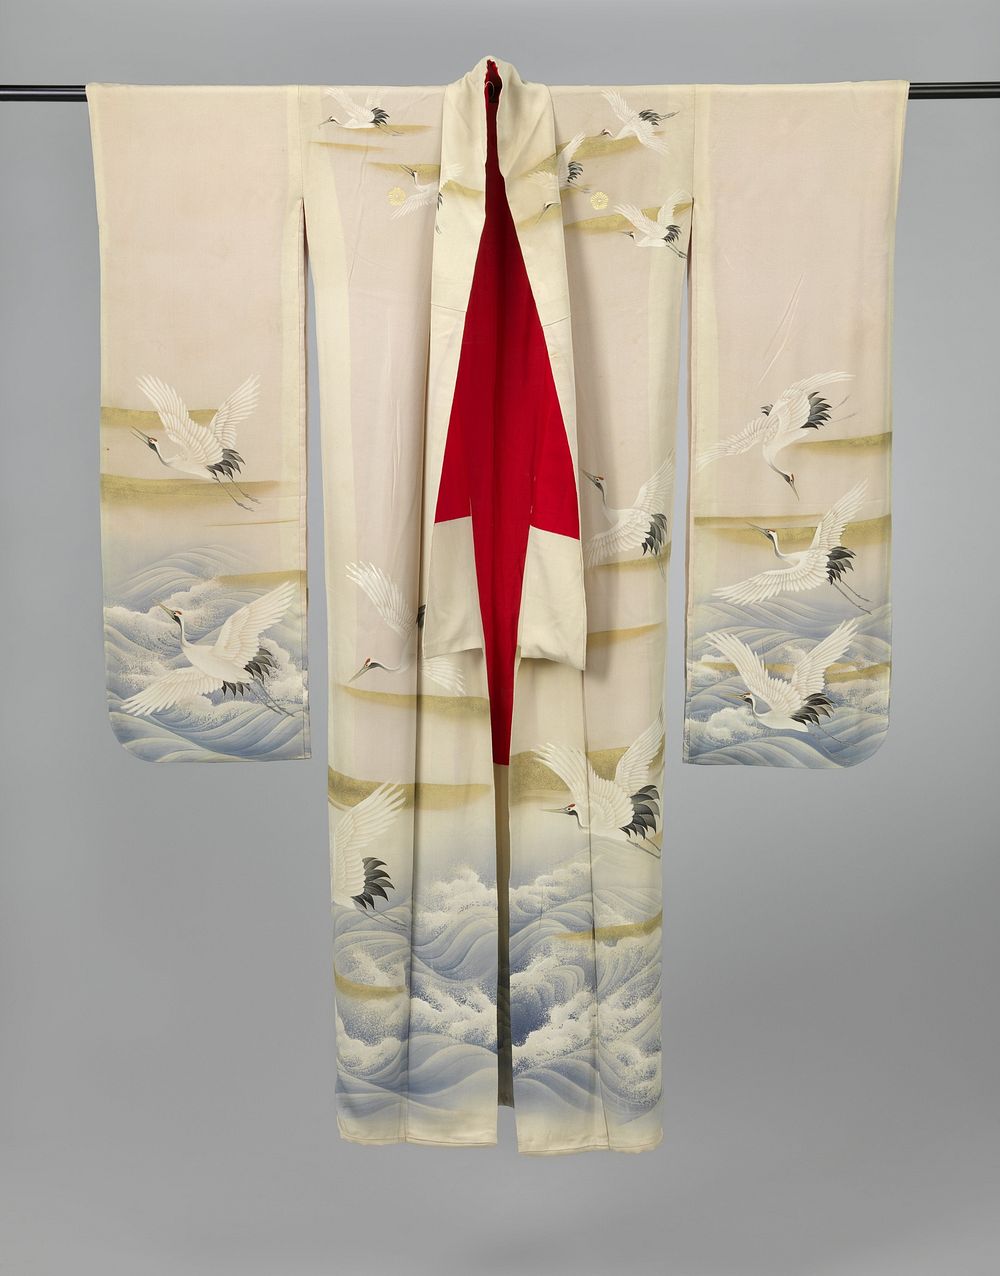 Set of three women’s kimonos decorated with cranes (1920 - 1940) by anonymous